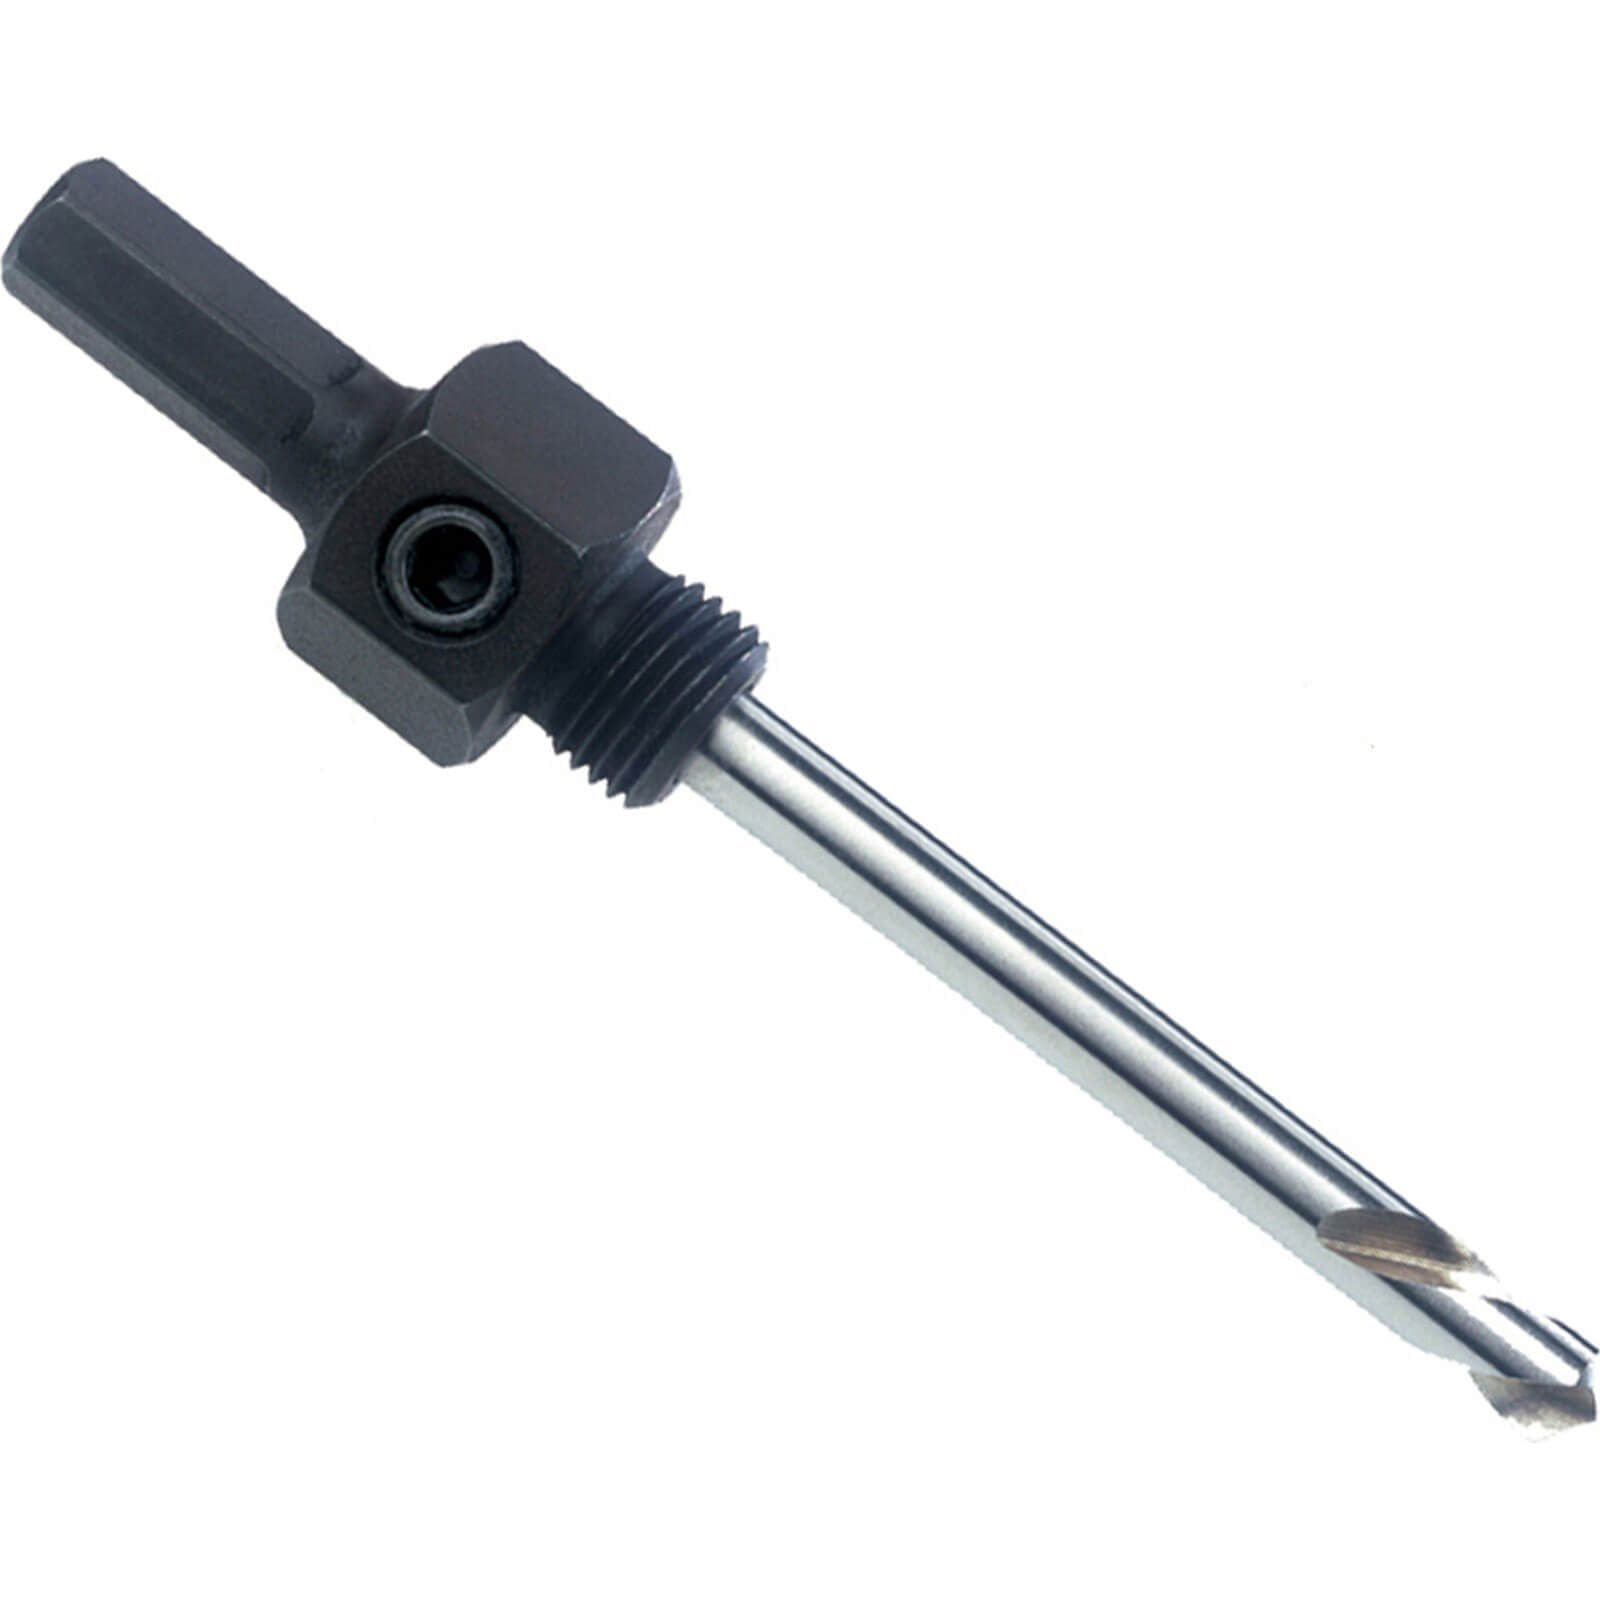 Photo of Bahco Arbor 6.4mm Shank To Suit 14mm - 30mm Hole Saws